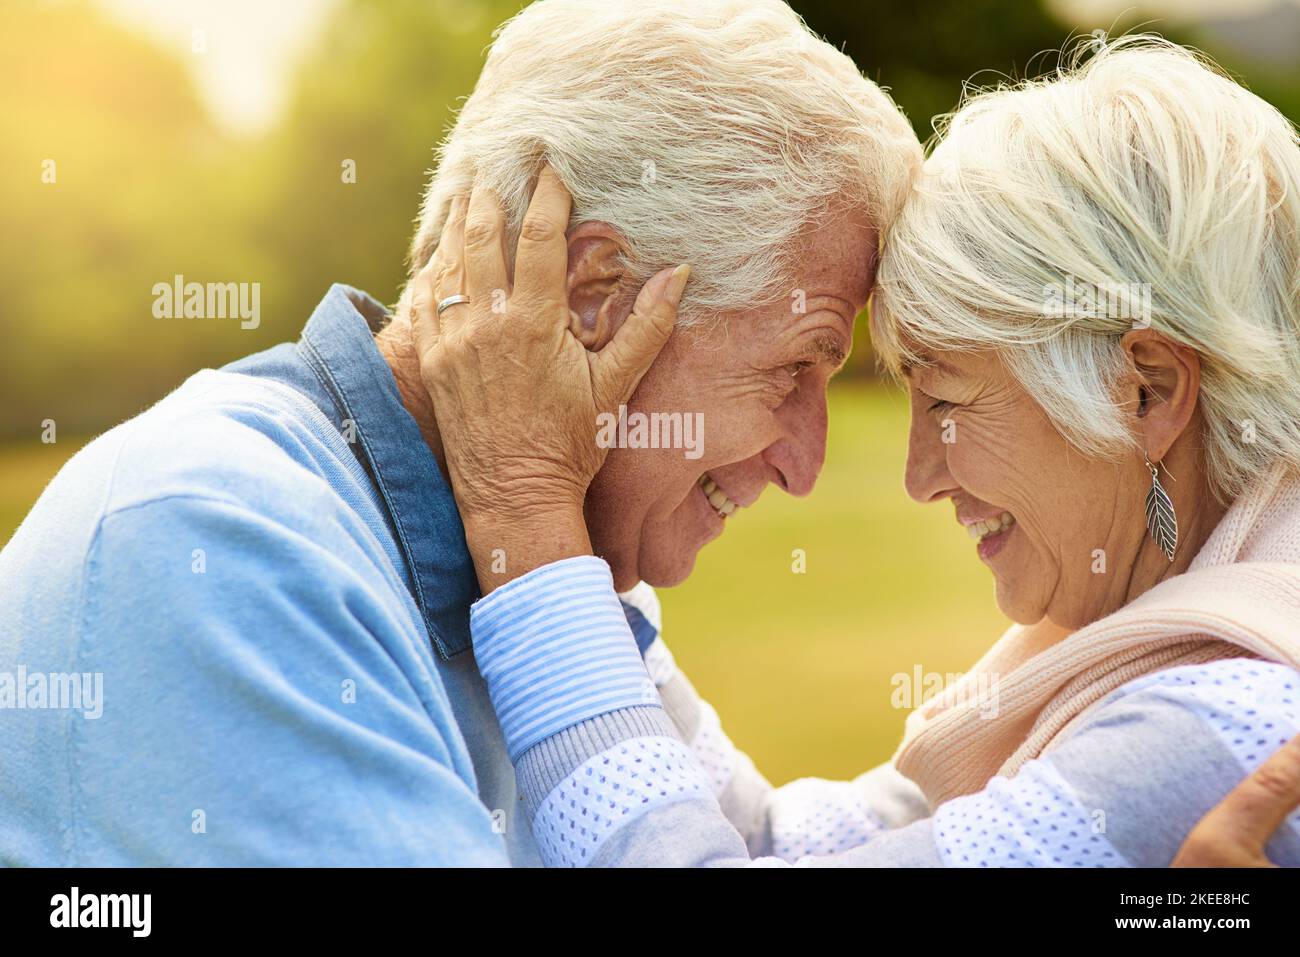 Their bond is unbreakable. a senior couple enjoying the day together in a park. Stock Photo